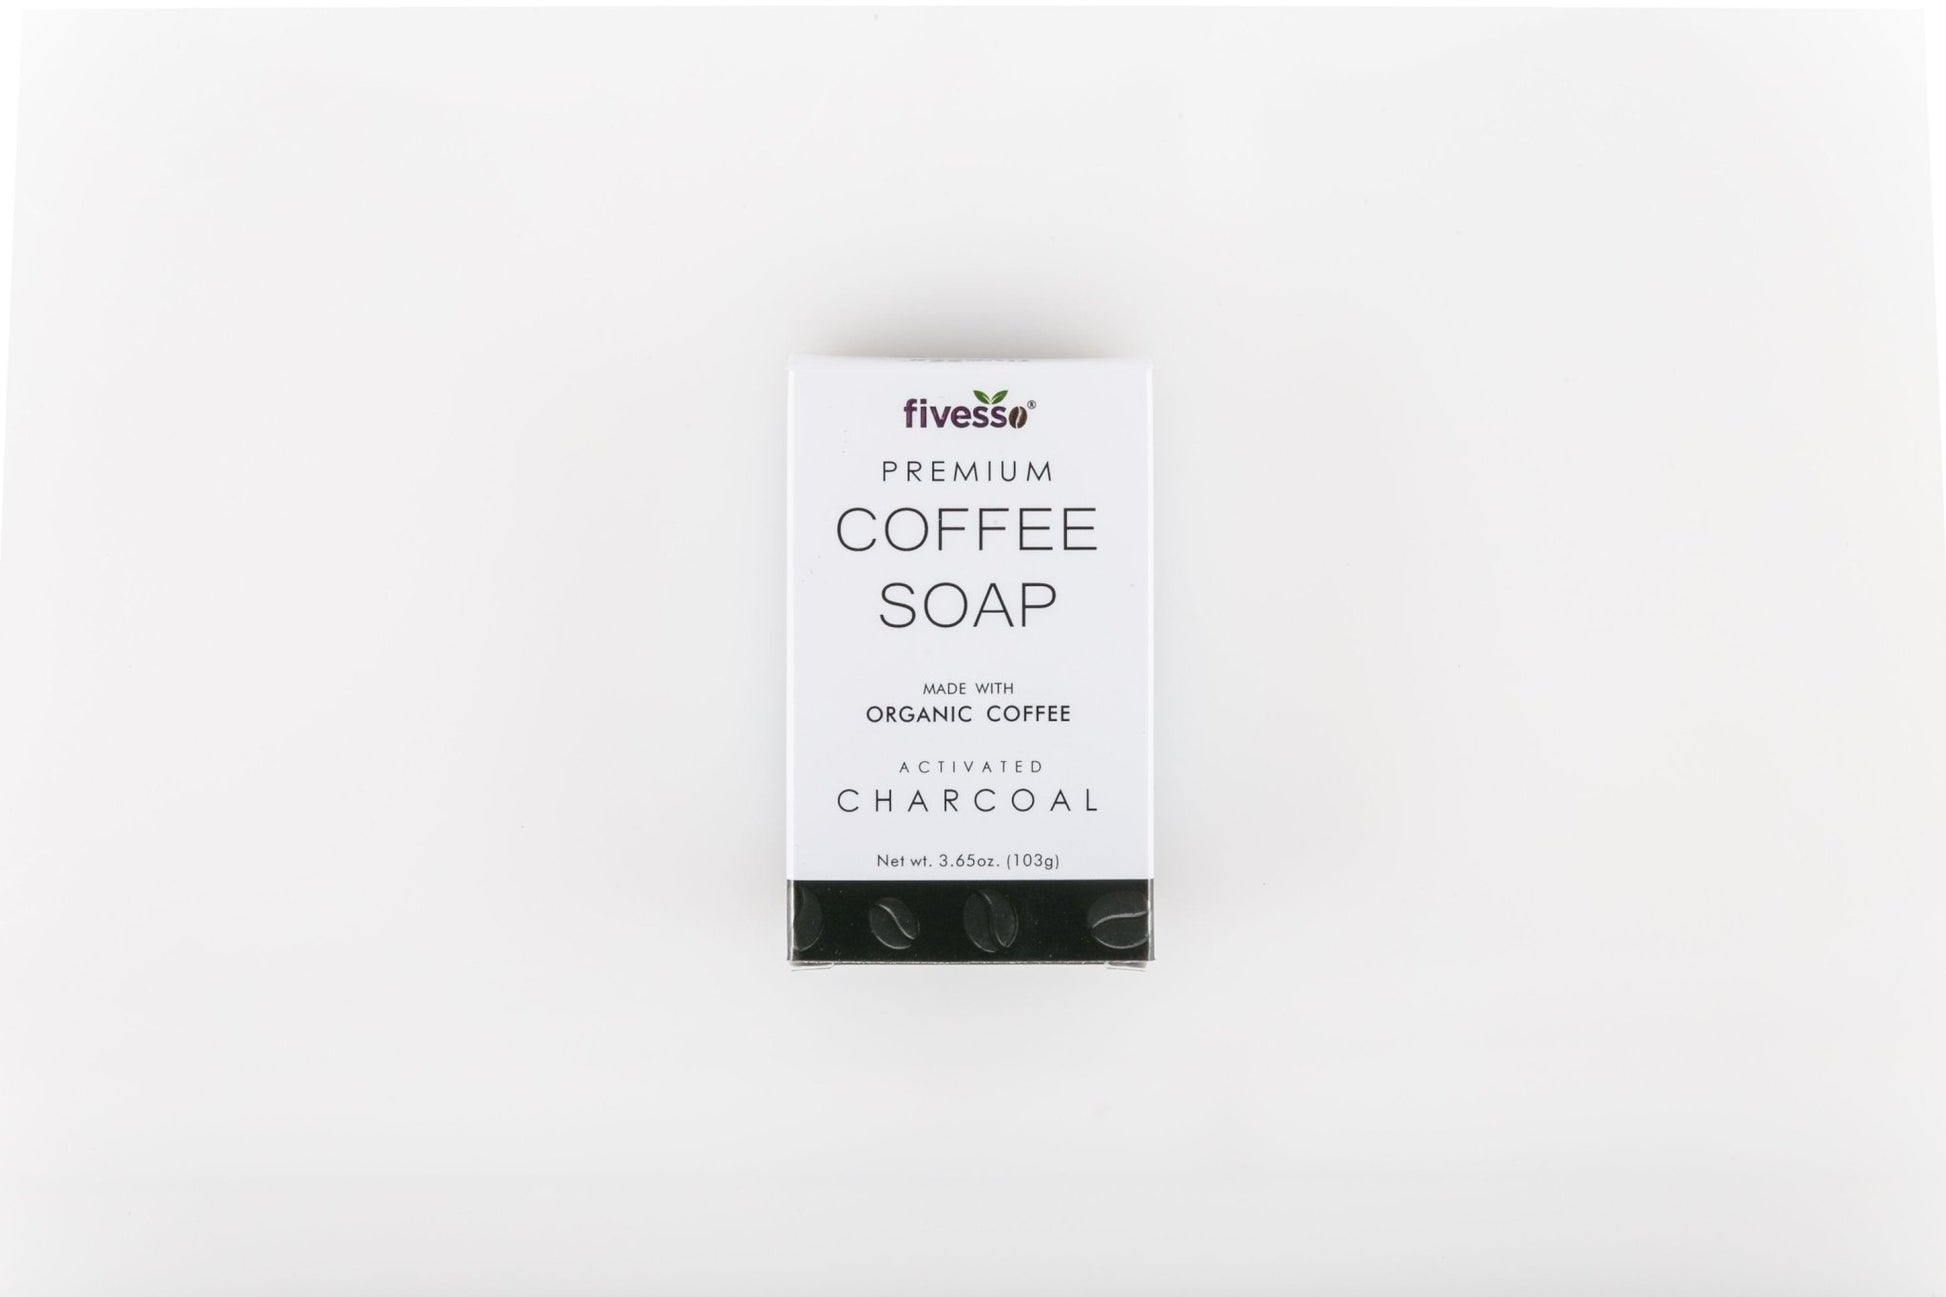 Image showcasing packaging for charcoal premium coffee soap bar, a skin tone beauty product known for multiple benefits.